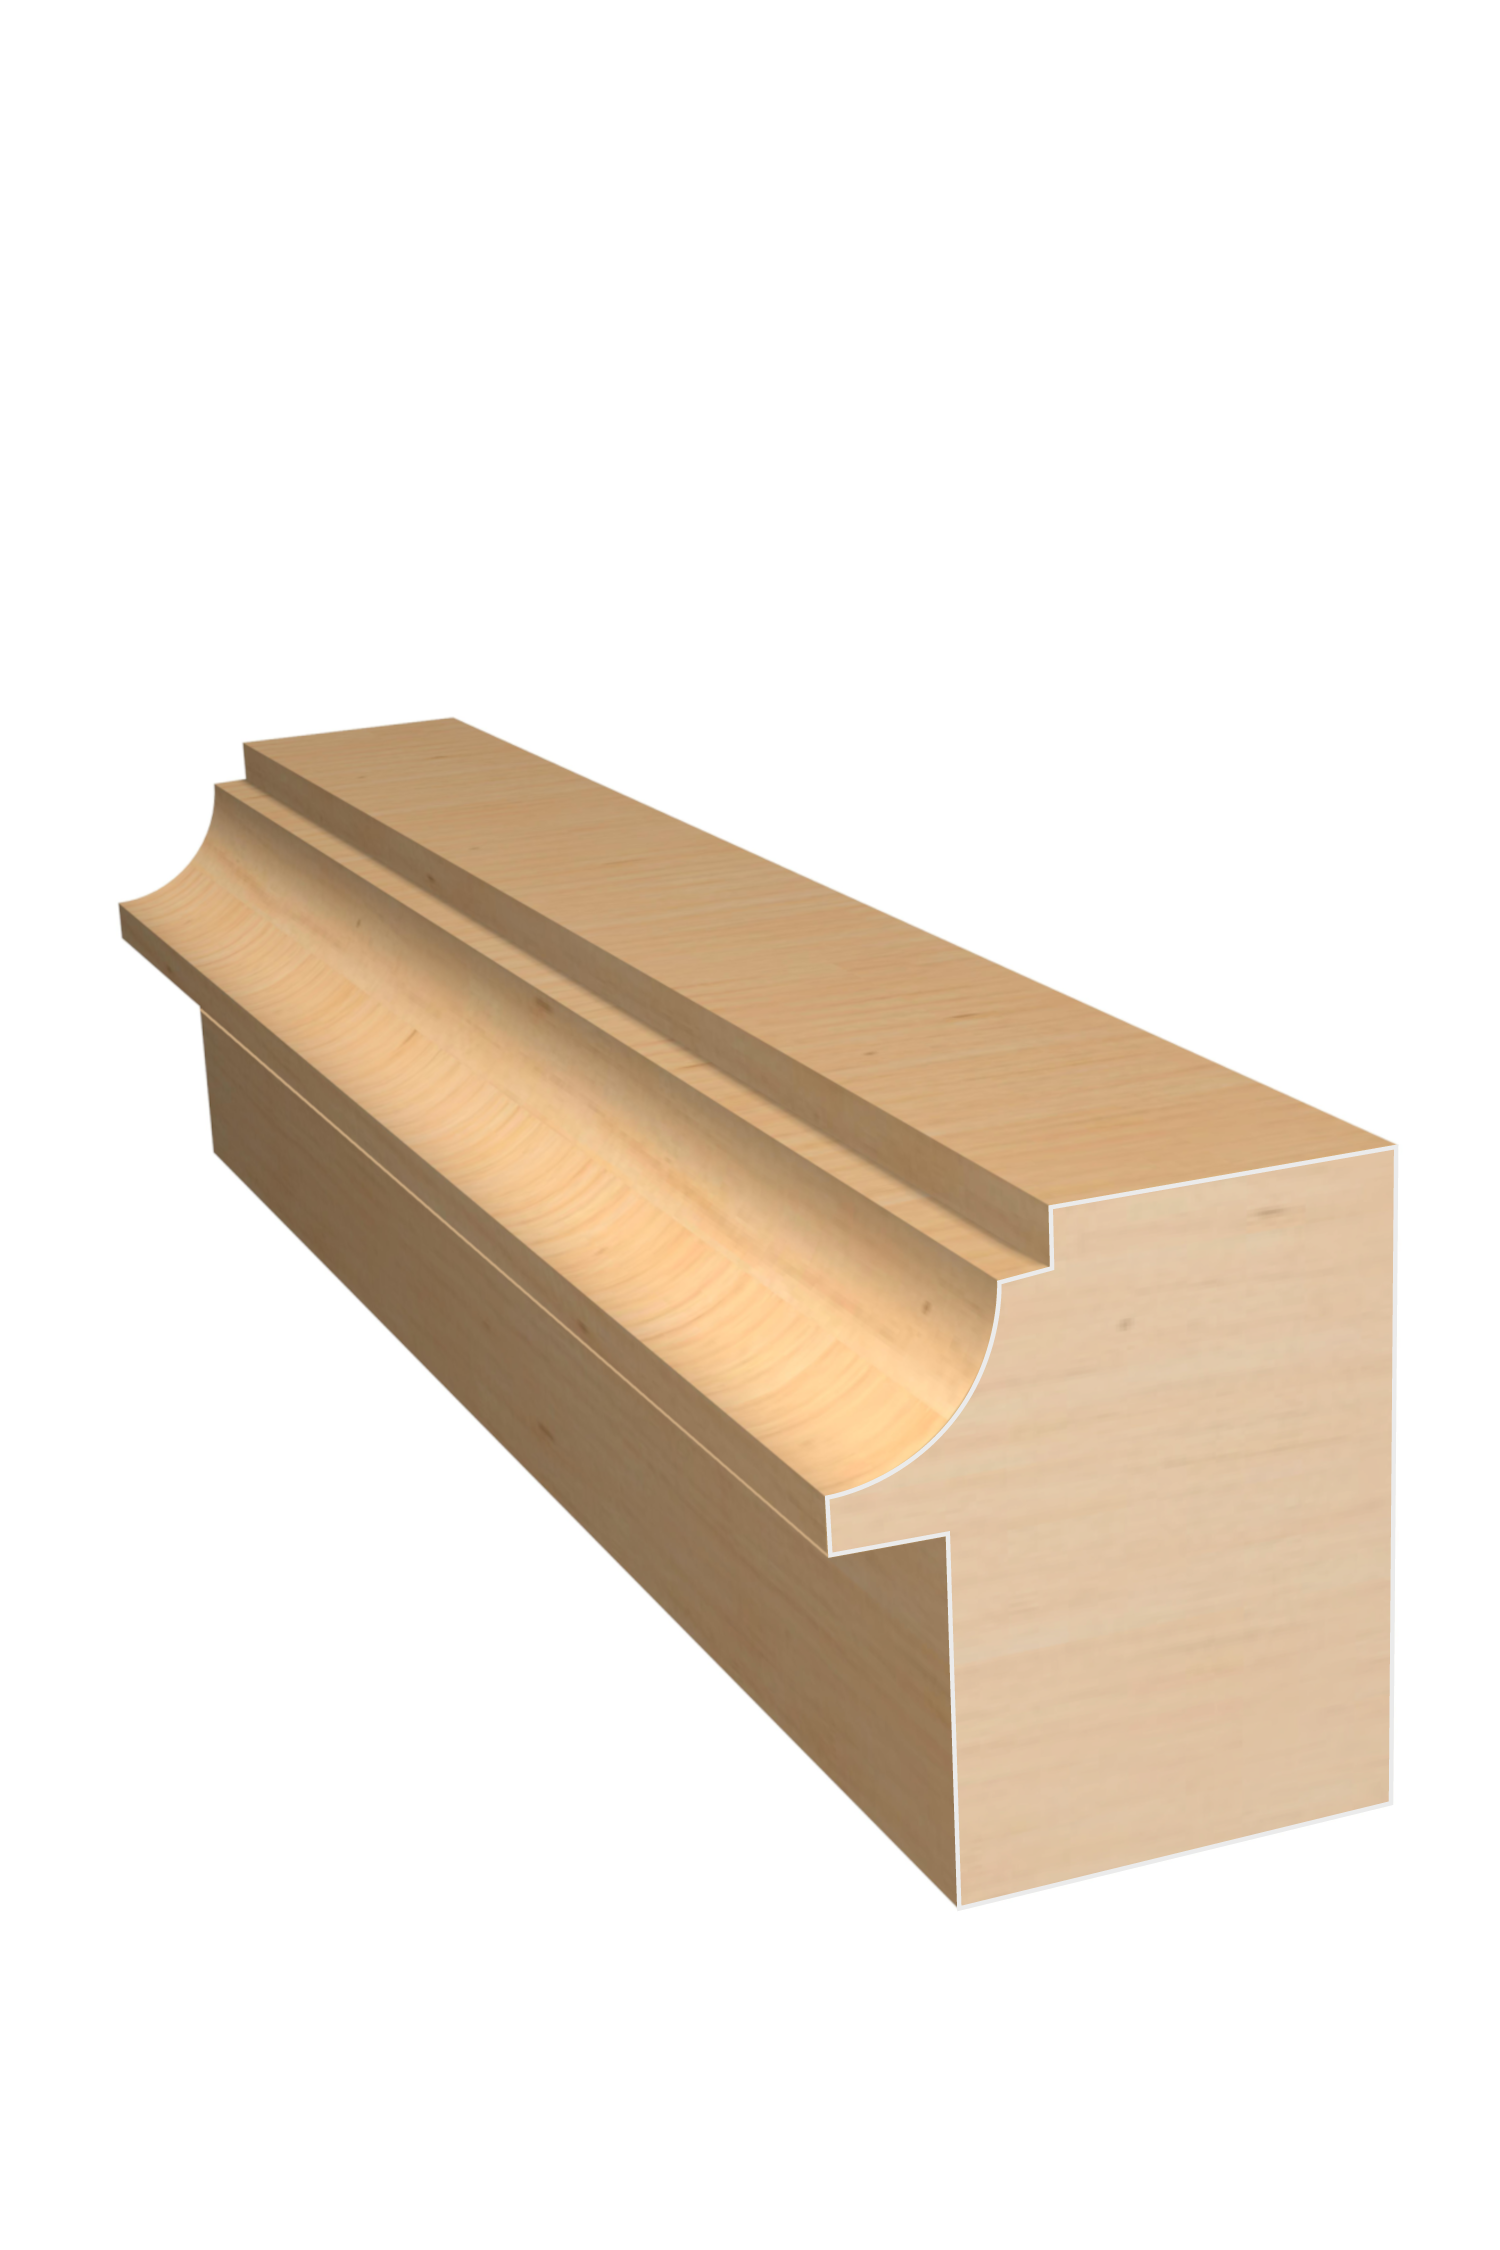 Three dimensional rendering of custom backband wood molding BBPL18 made by Public Lumber Company in Detroit.